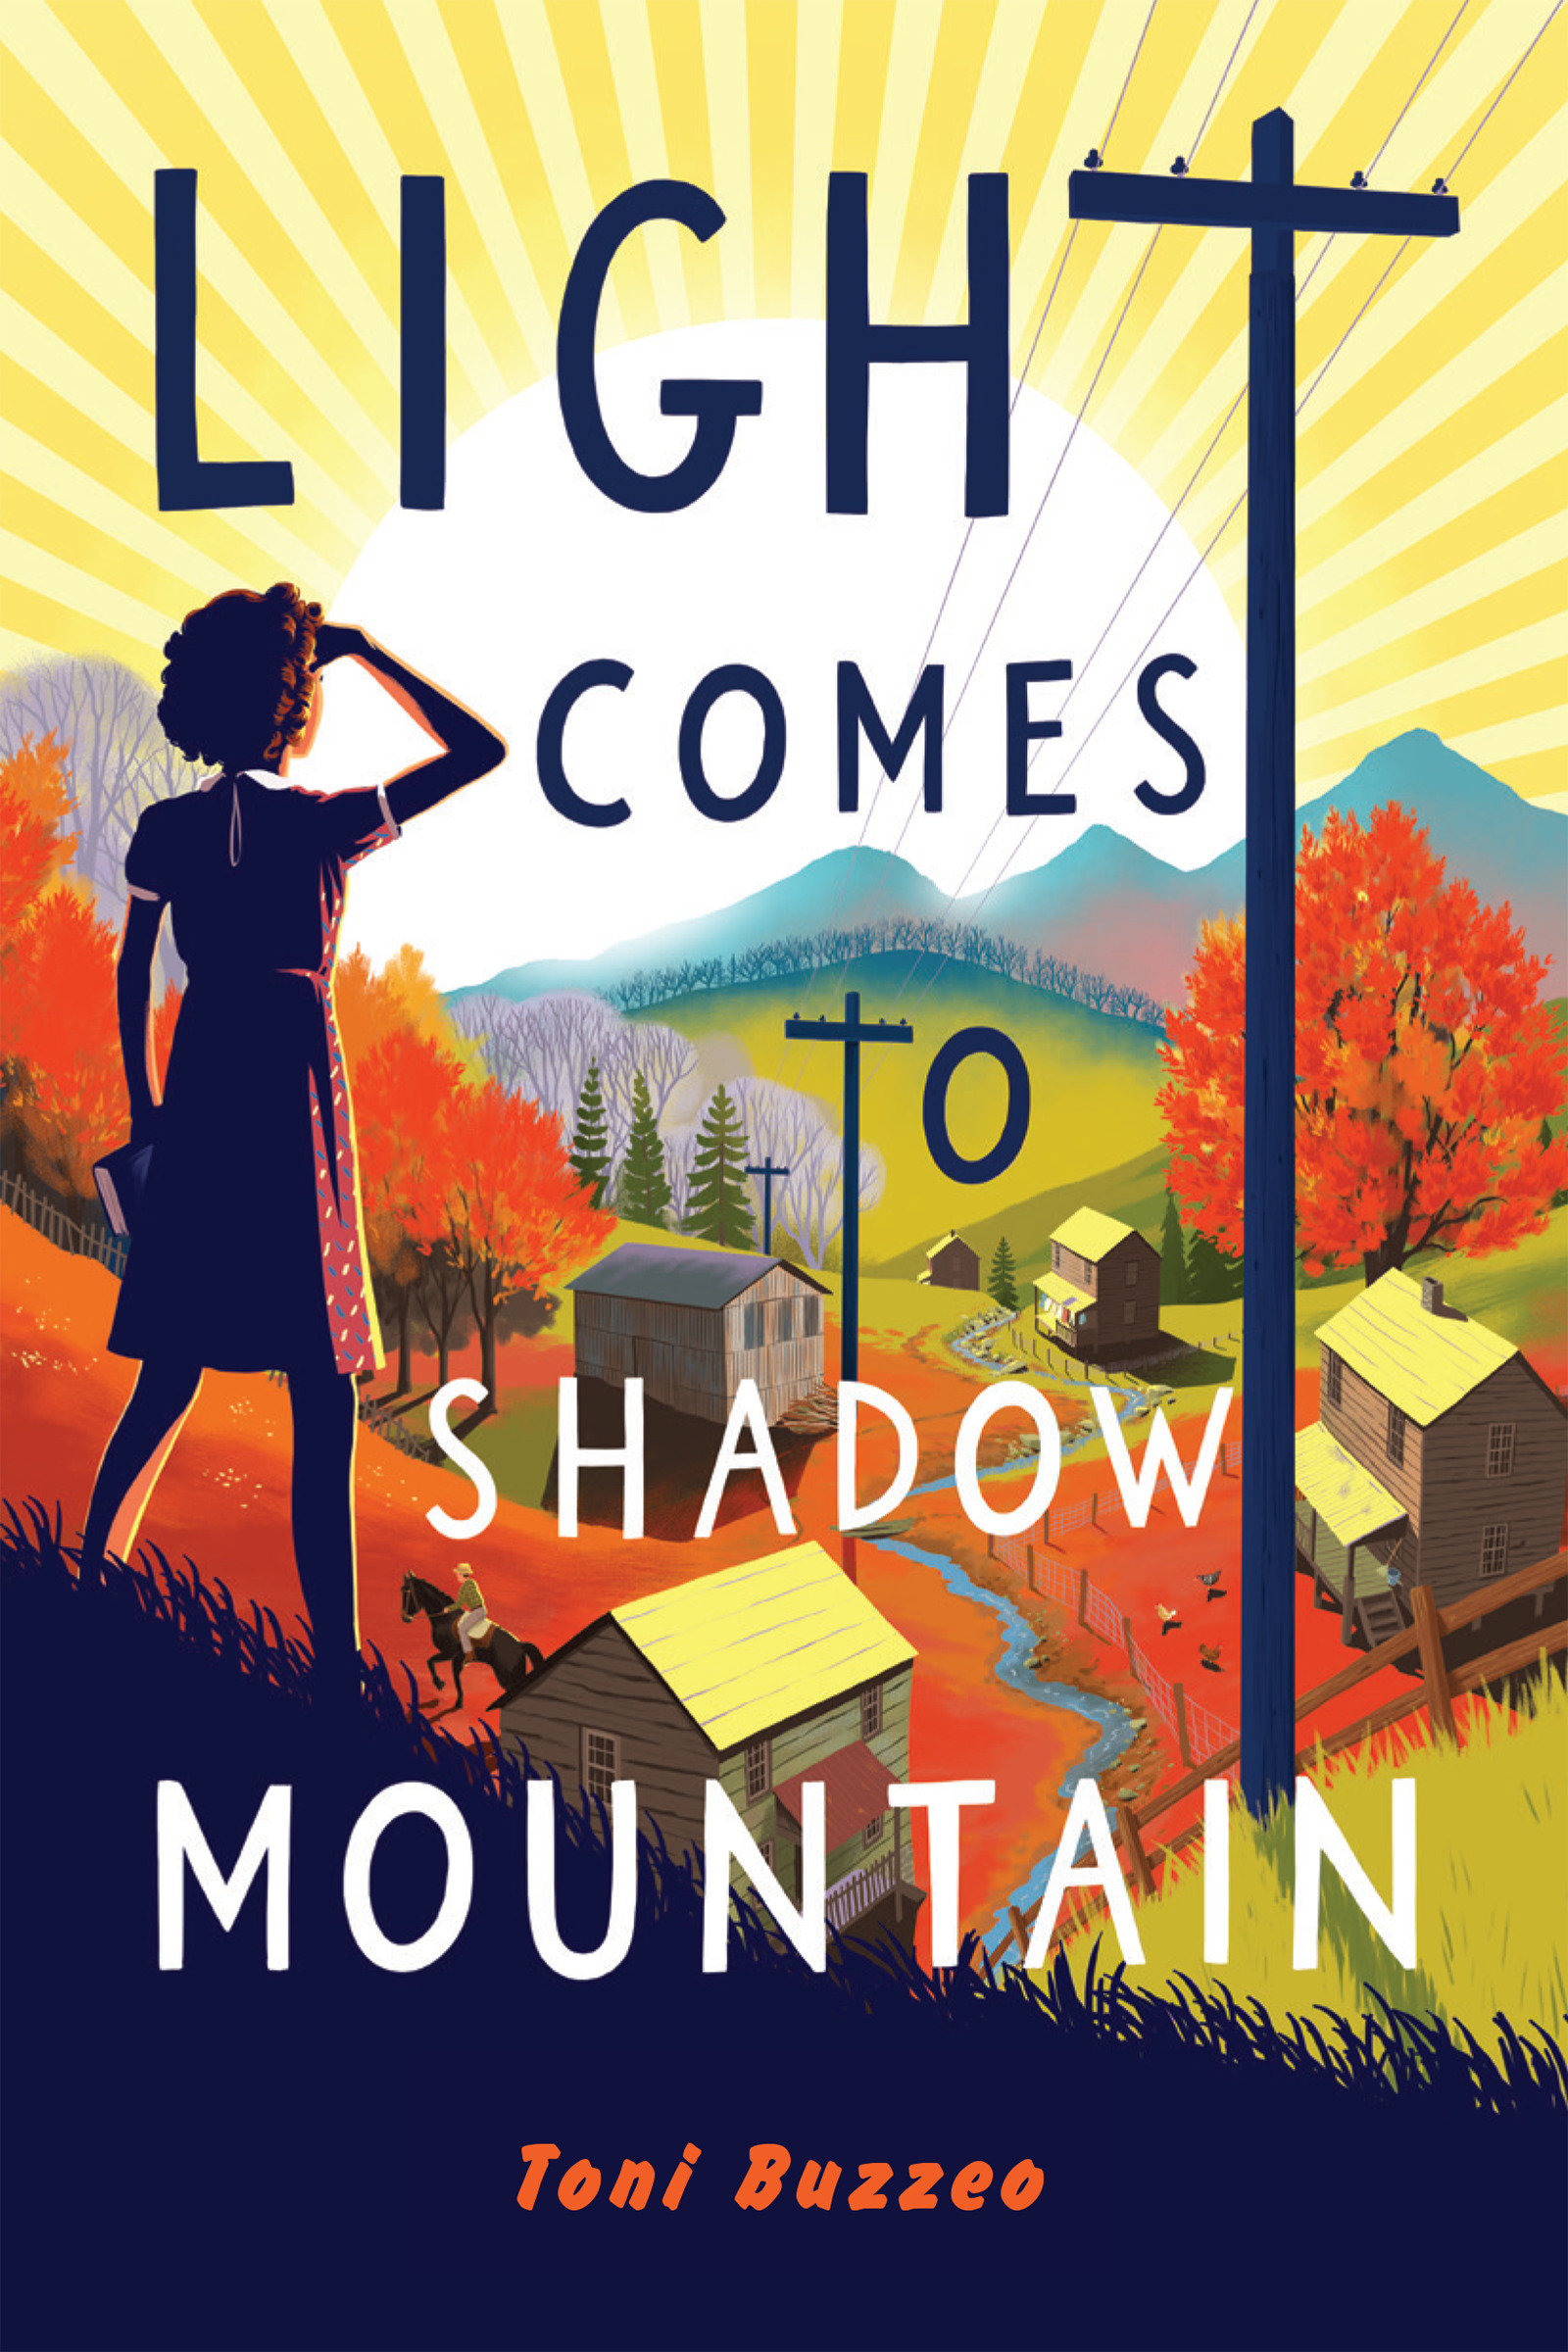 Light Comes To Shadow Mountain (Hardcover Book)